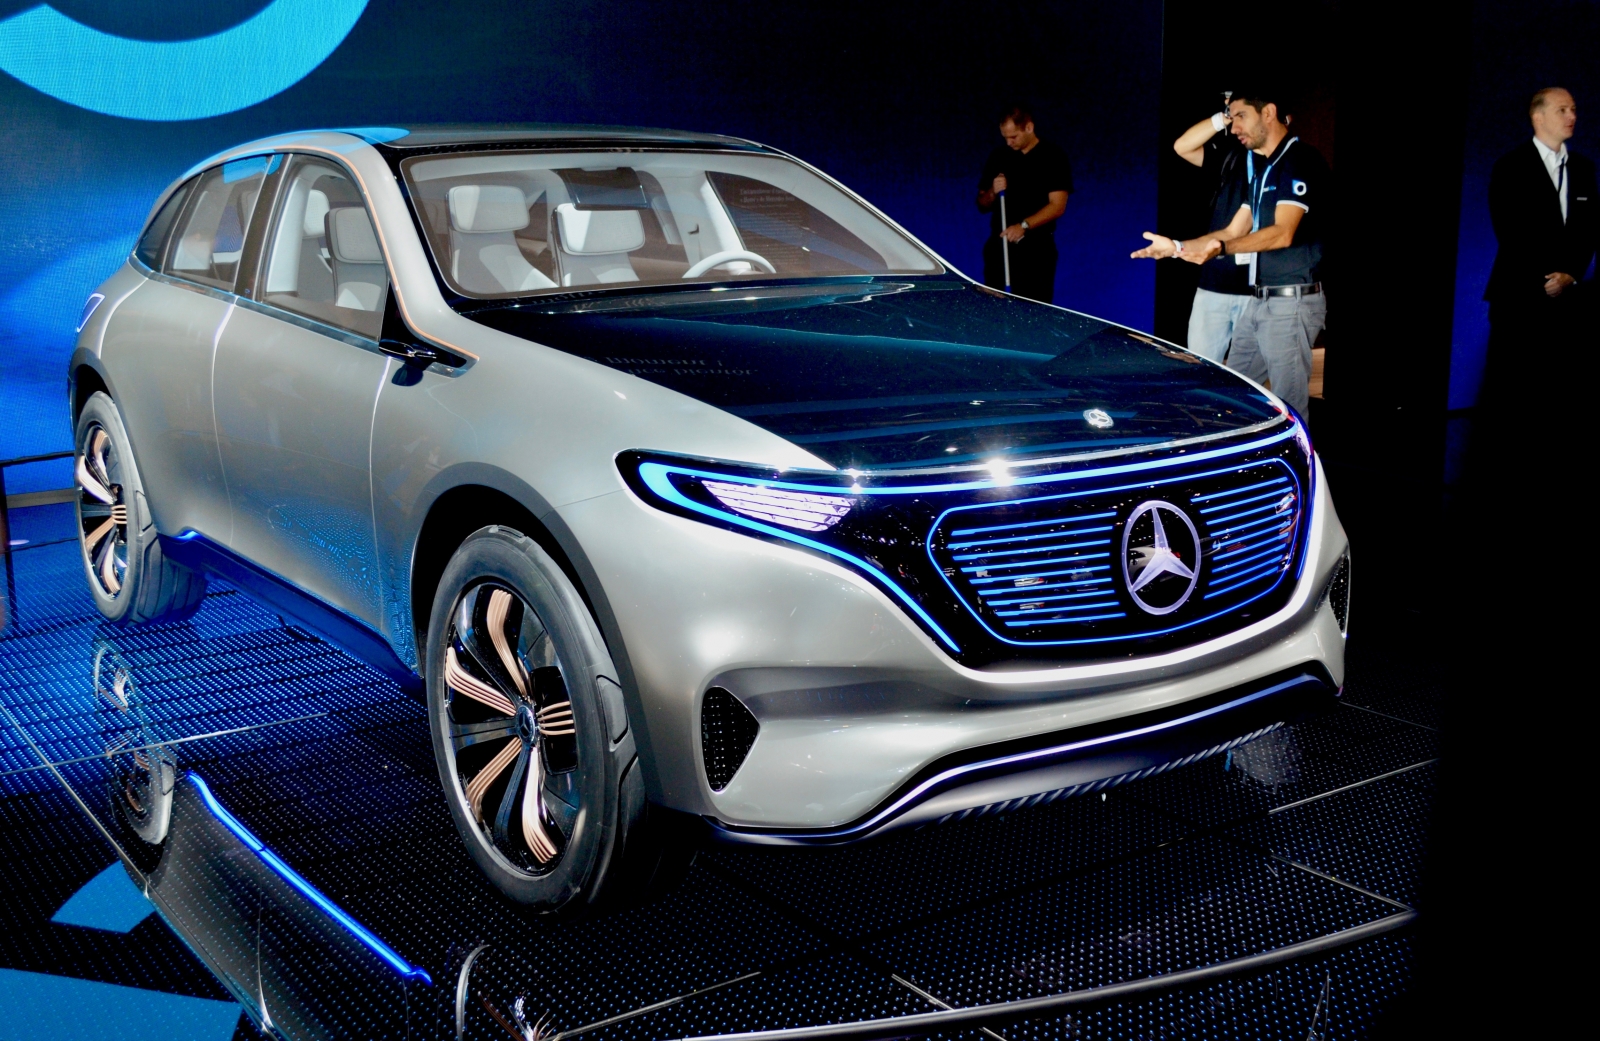 generation eq starting point mercedes electric future